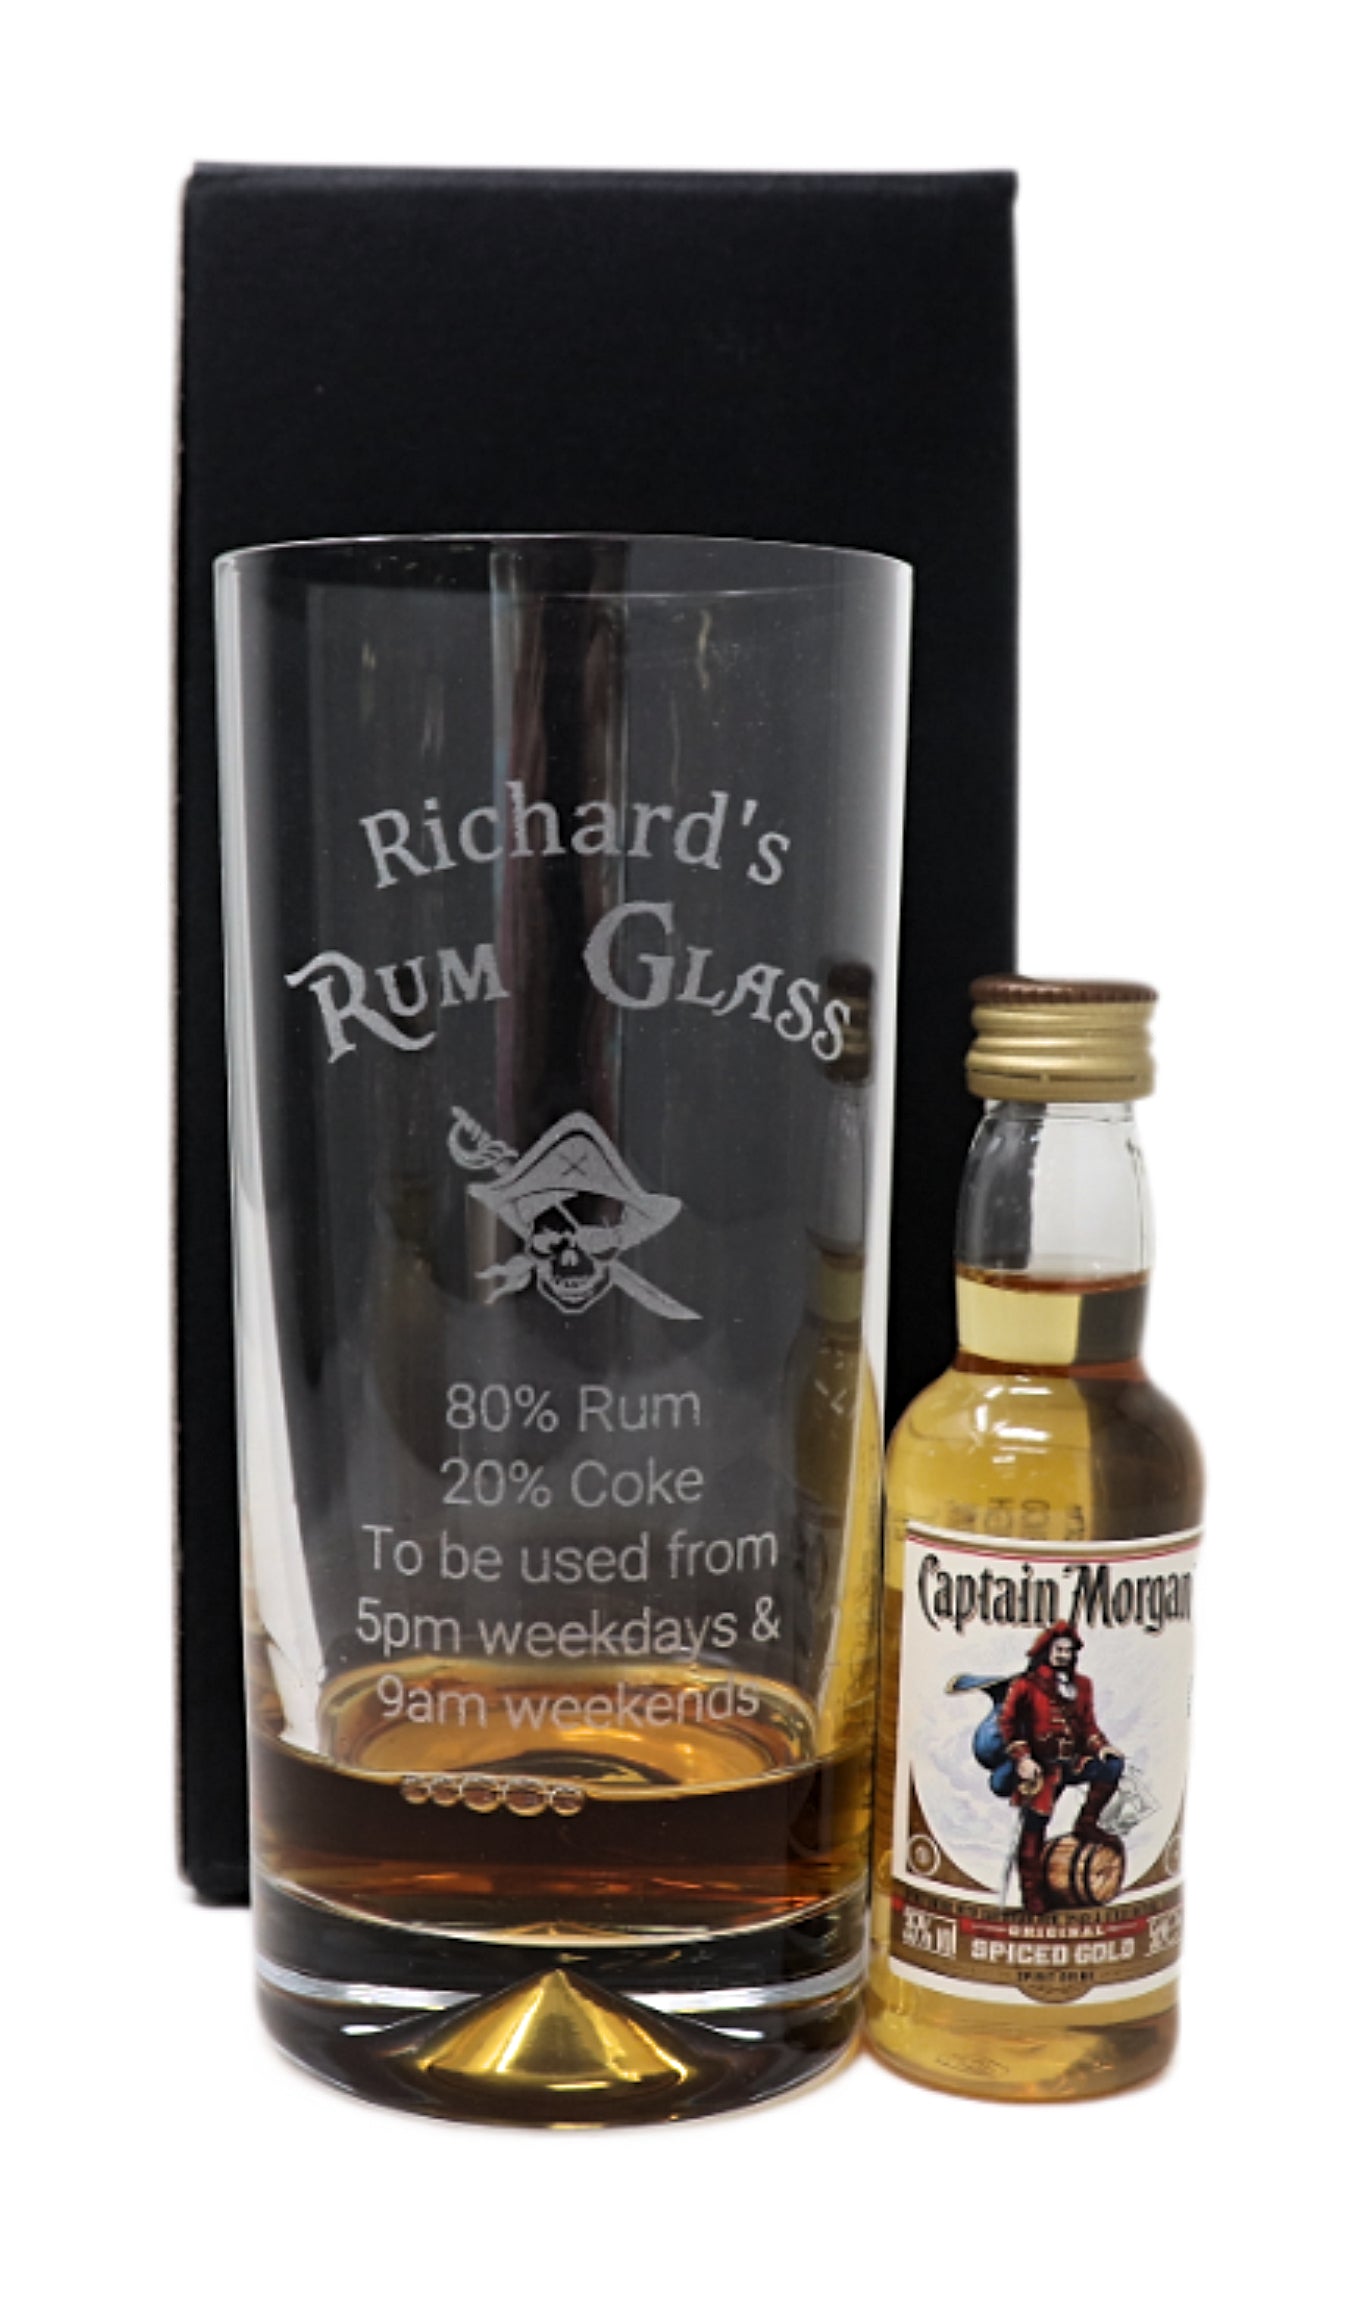 PERSONALISED ENGRAVED CAPTAIN MORGAN GLASS RUM & COKE GLASS GIFT BOXED rum  glass